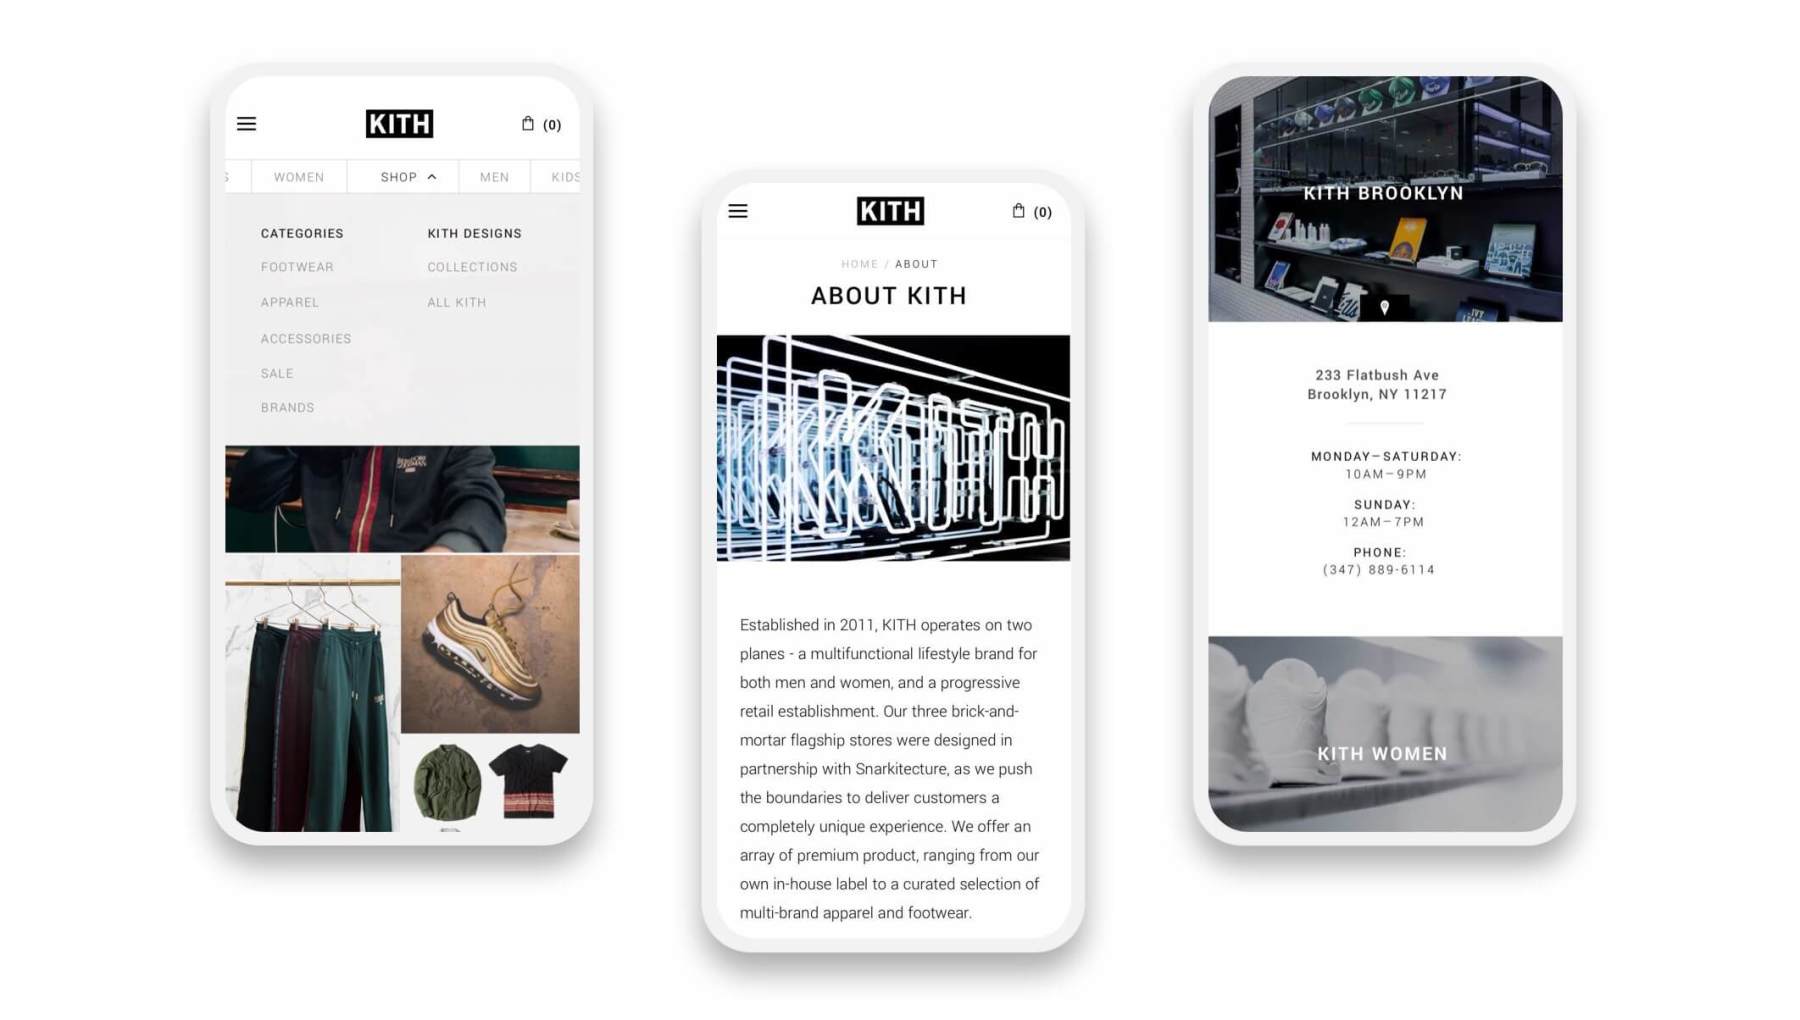 kith shopify mobile website pages on three smartphones